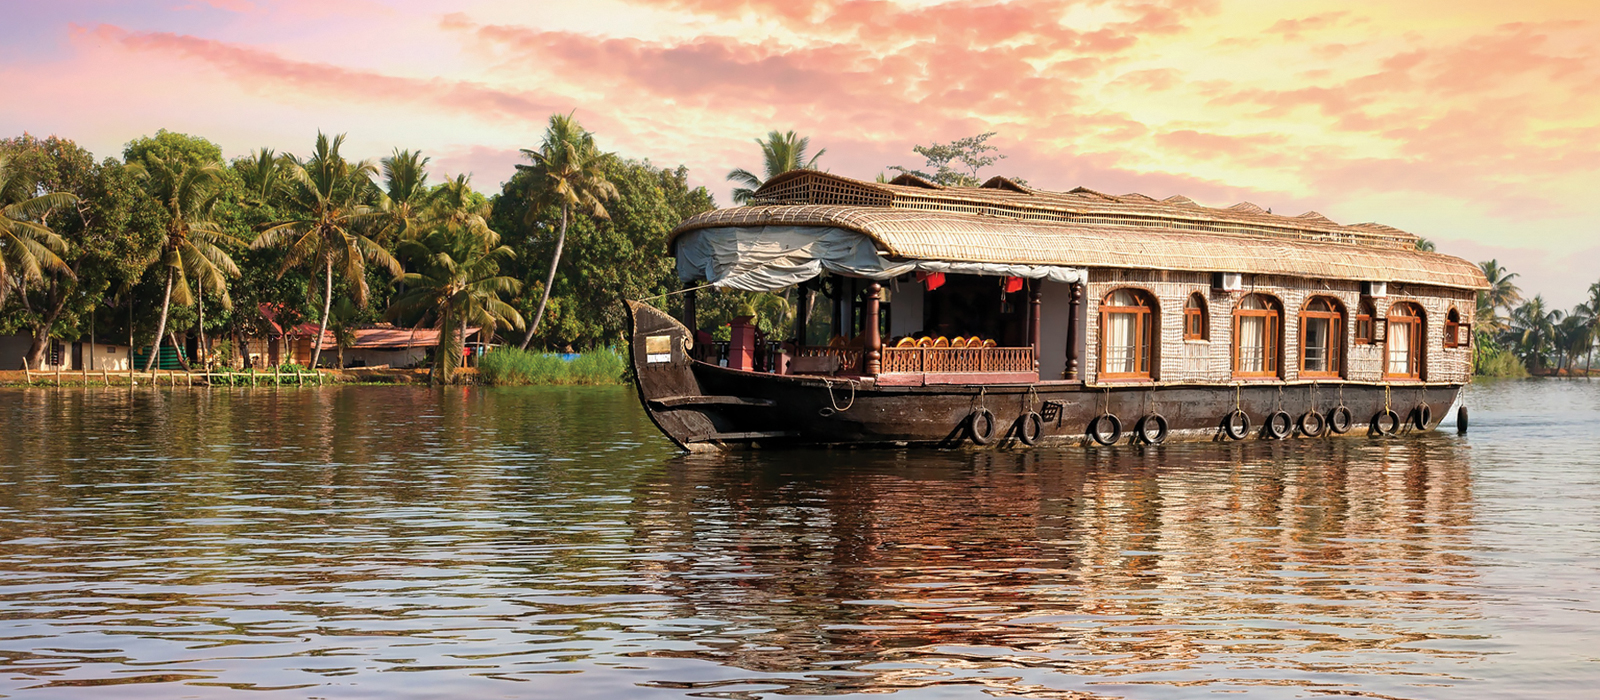 South India Tour And Houseboat Vacations In Kerala